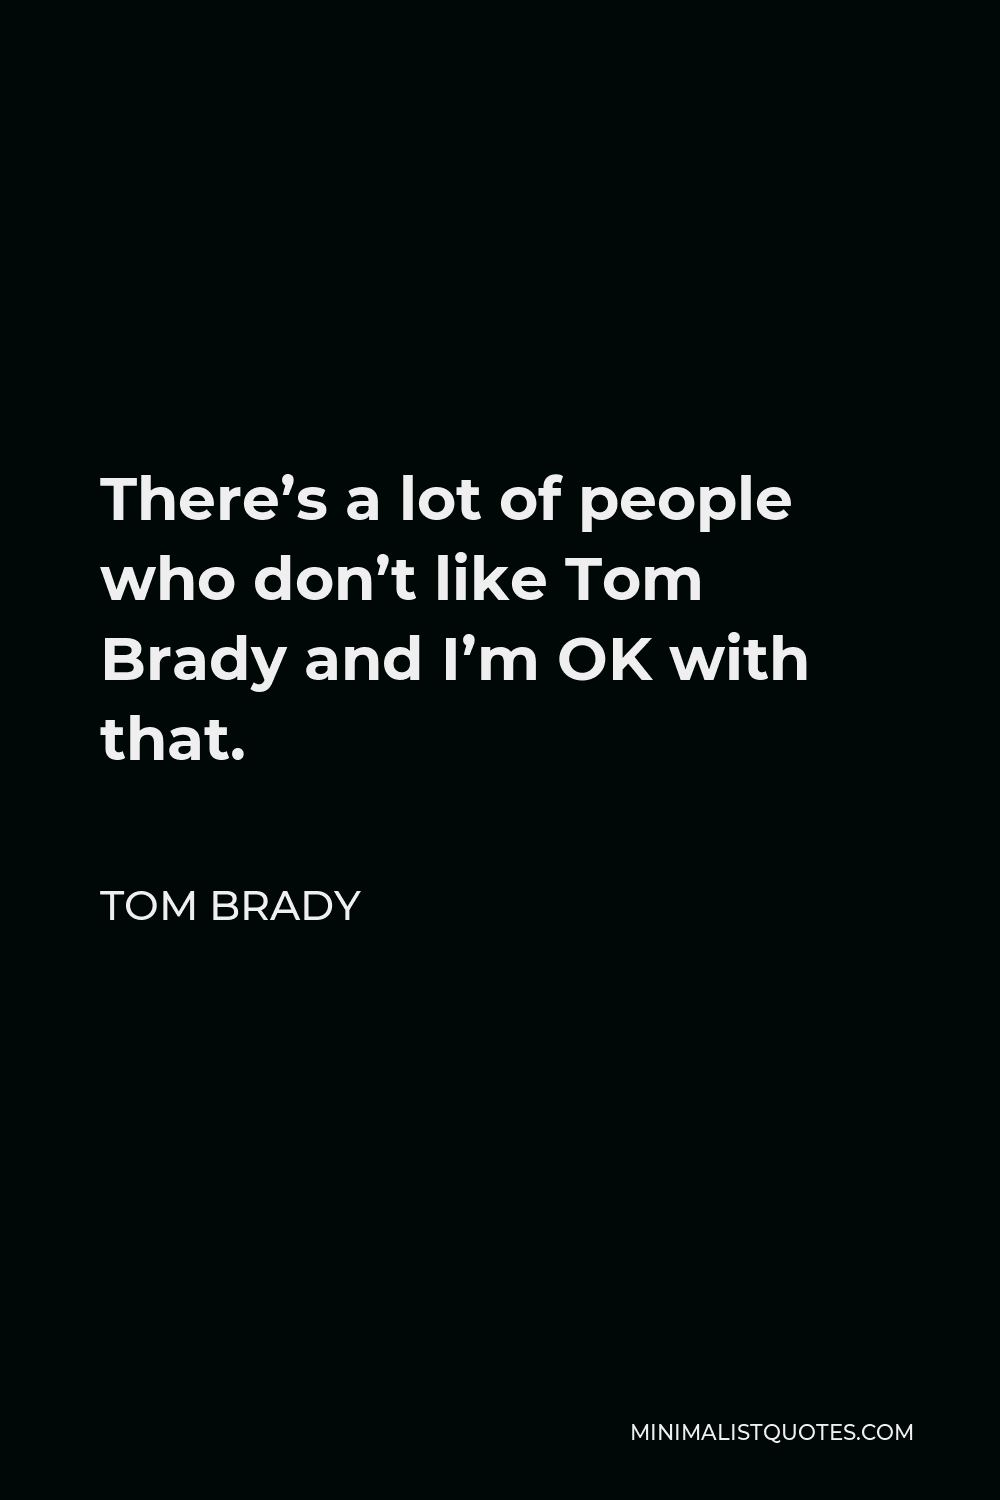 Tom Brady Quote - There’s a lot of people who don’t like Tom Brady and I’m OK with that.